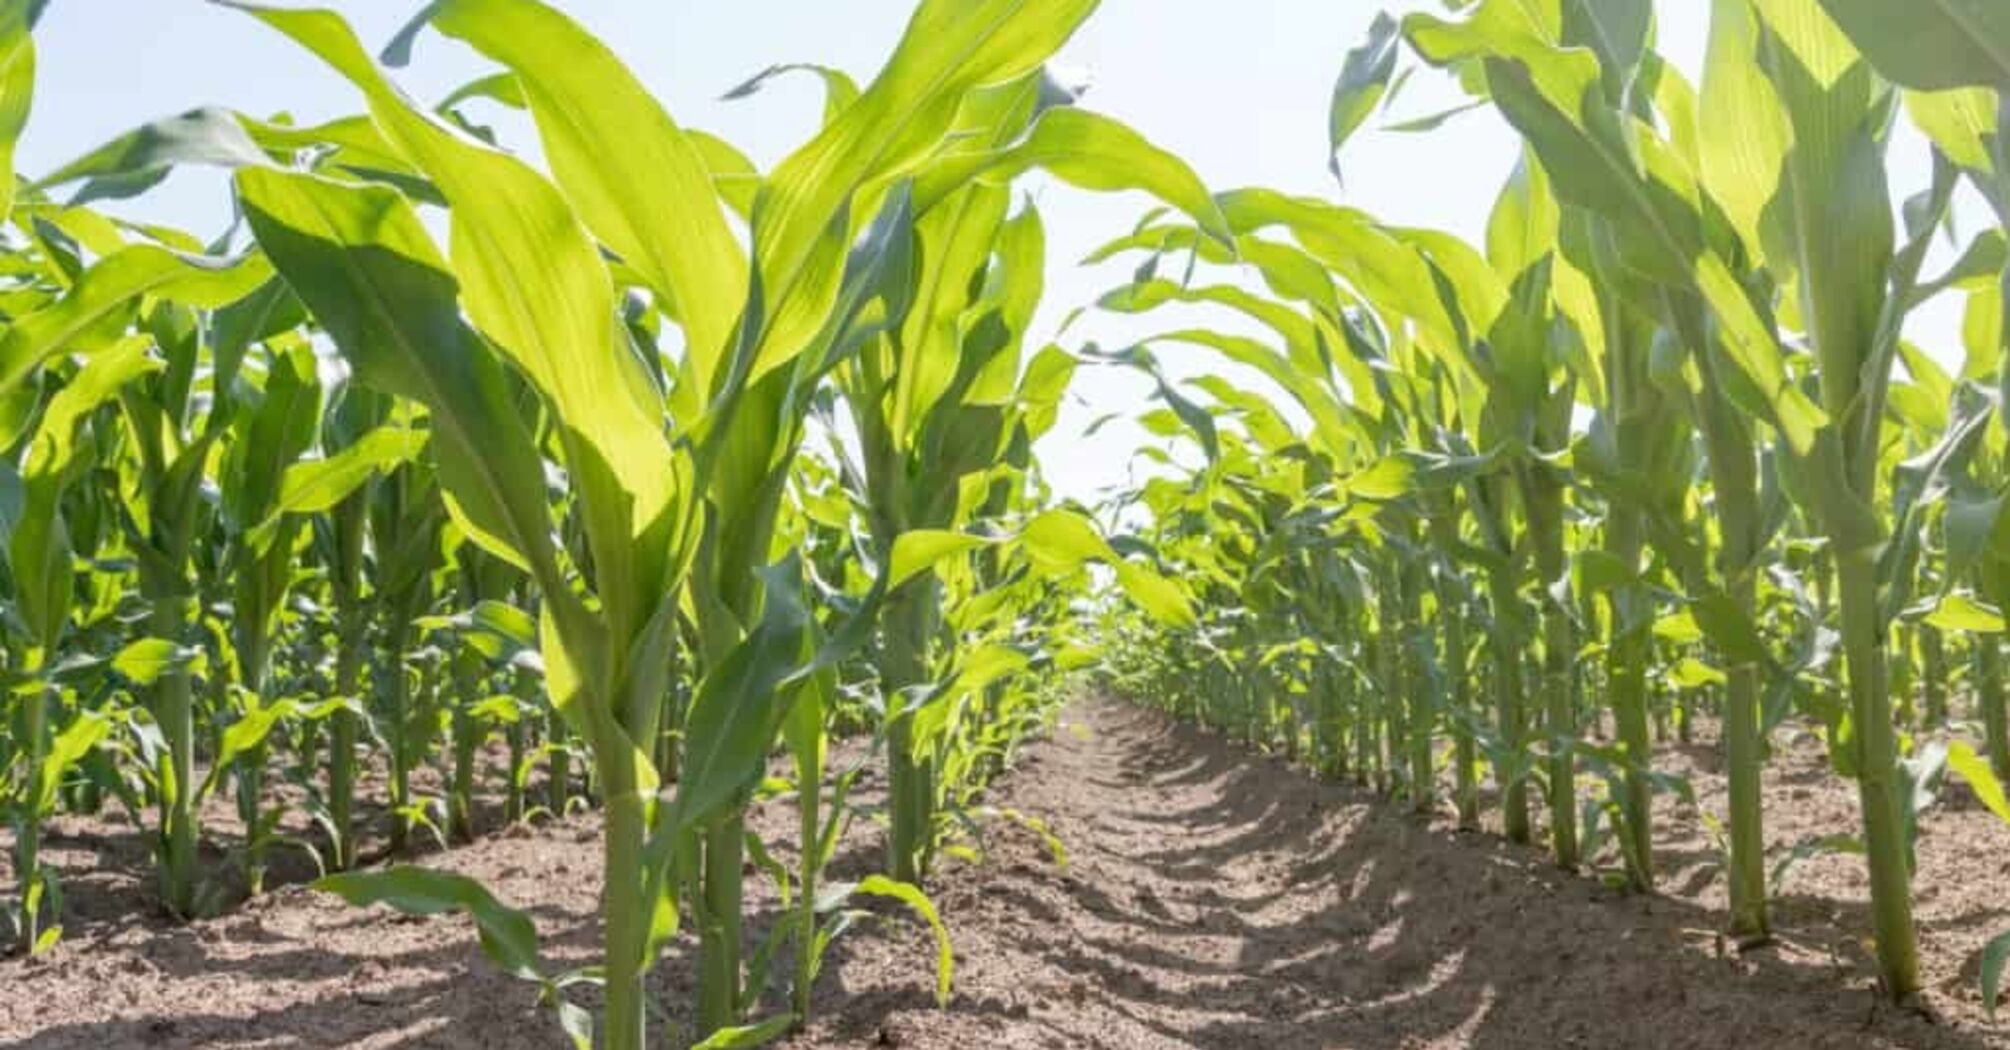 When to sow corn to get a good harvest